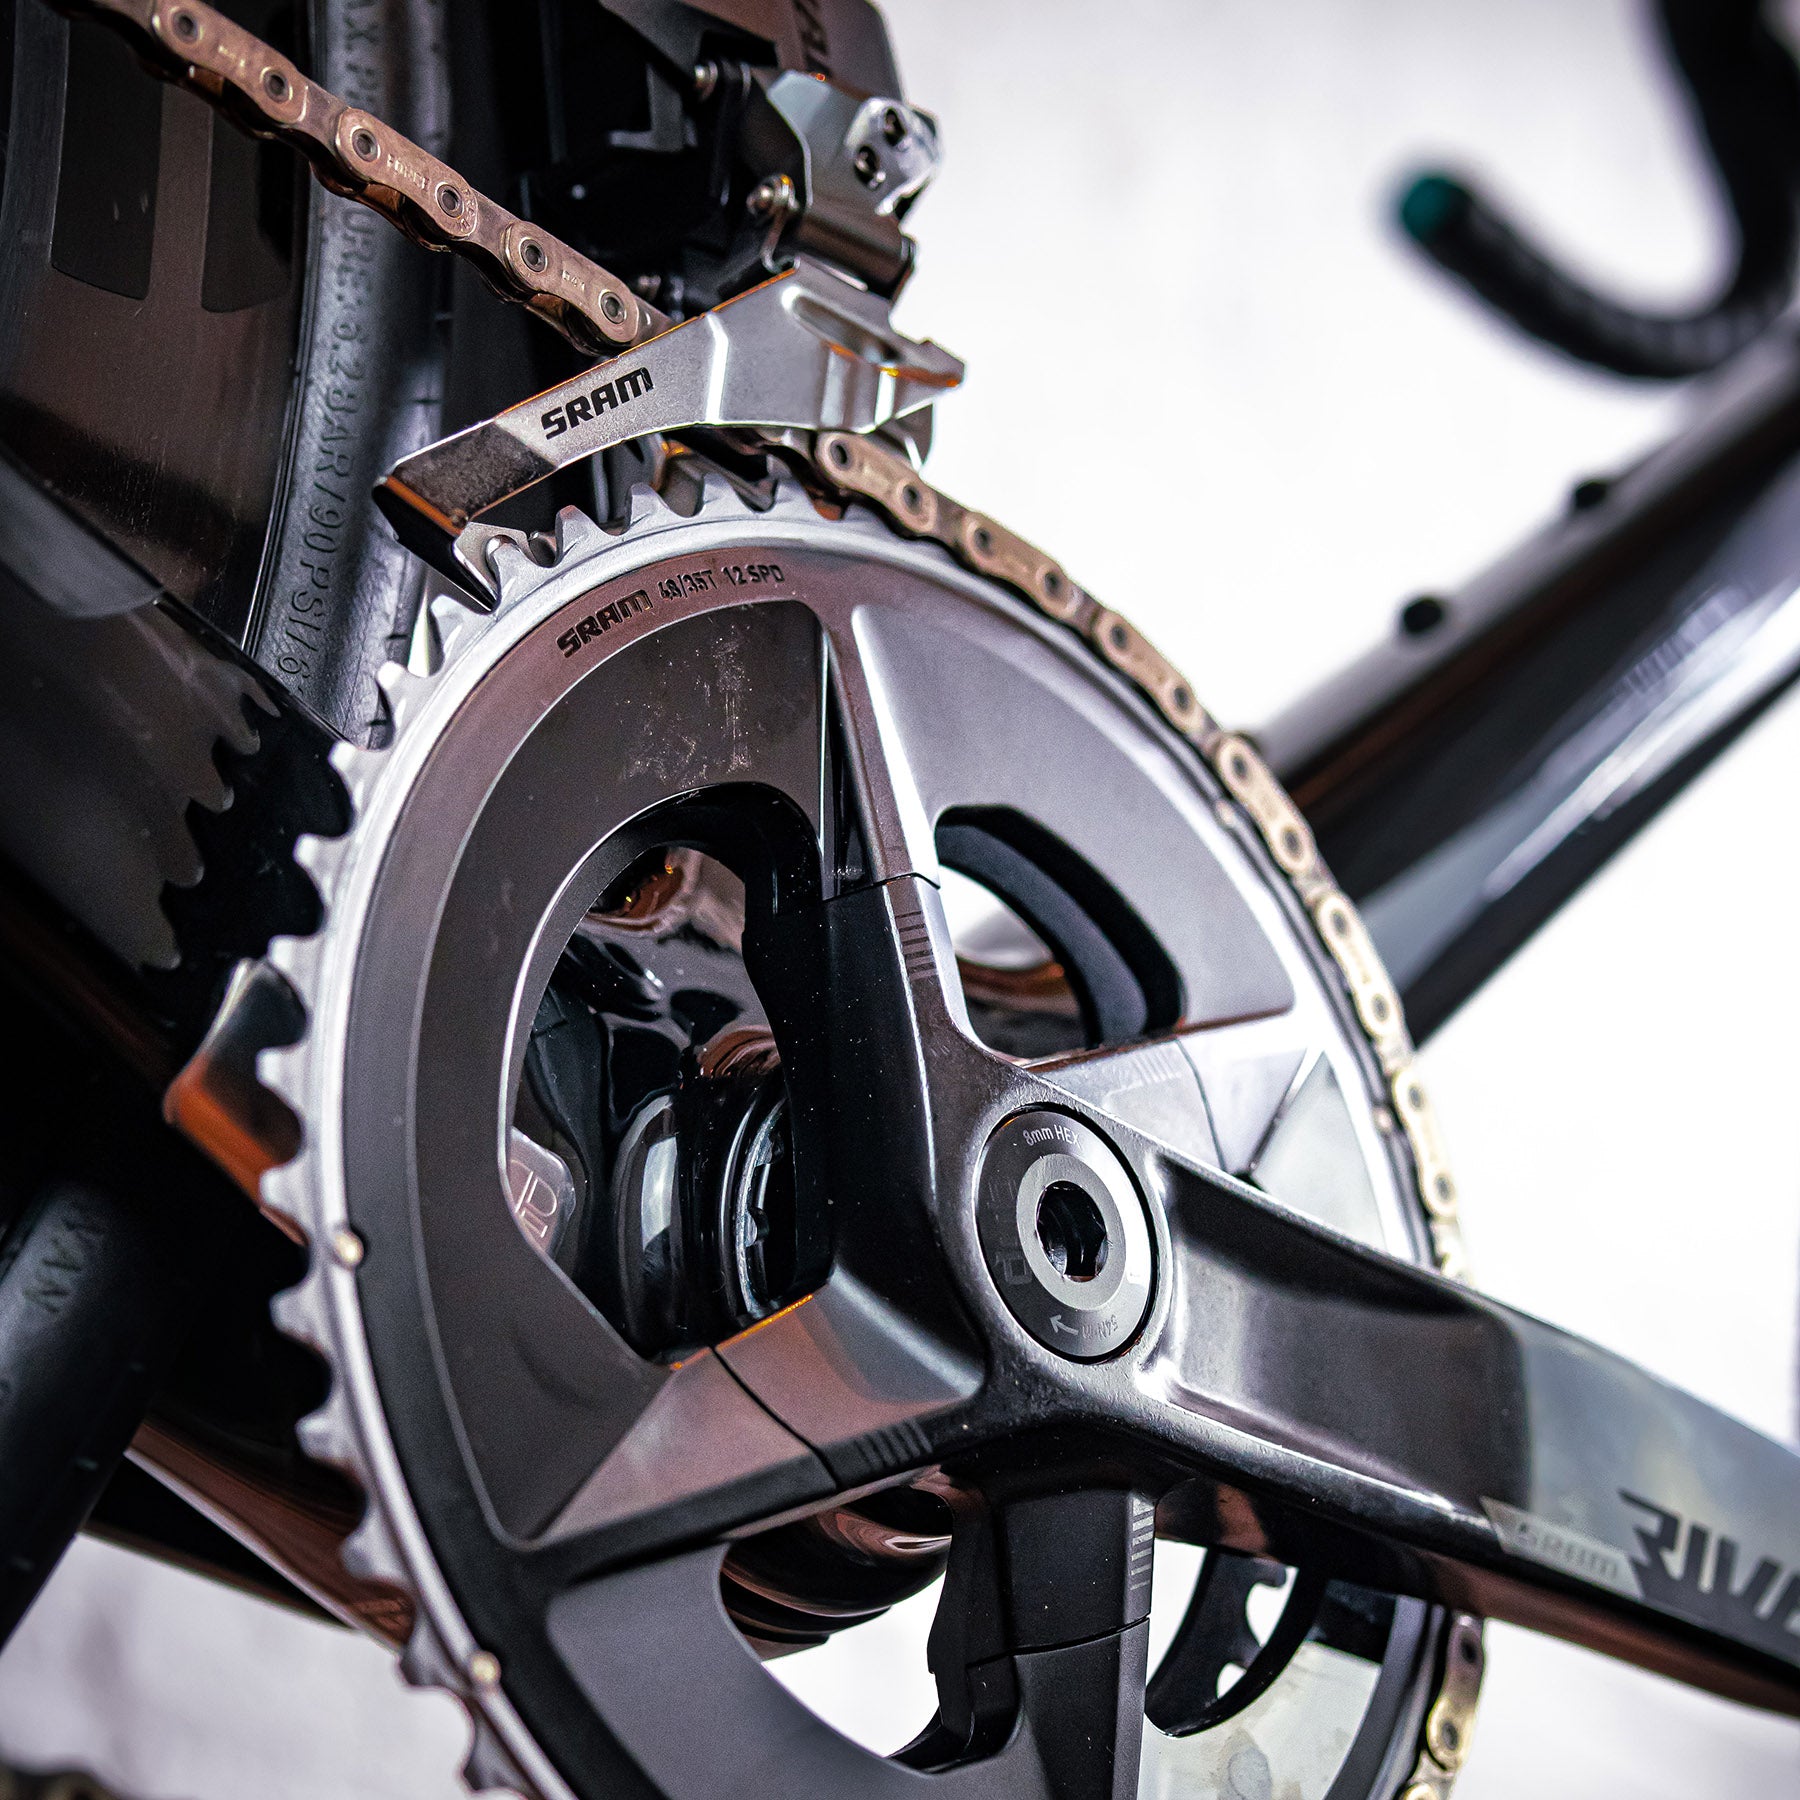 Image features the right pedal, chain, and gears on the Chapter 2 TOA bike